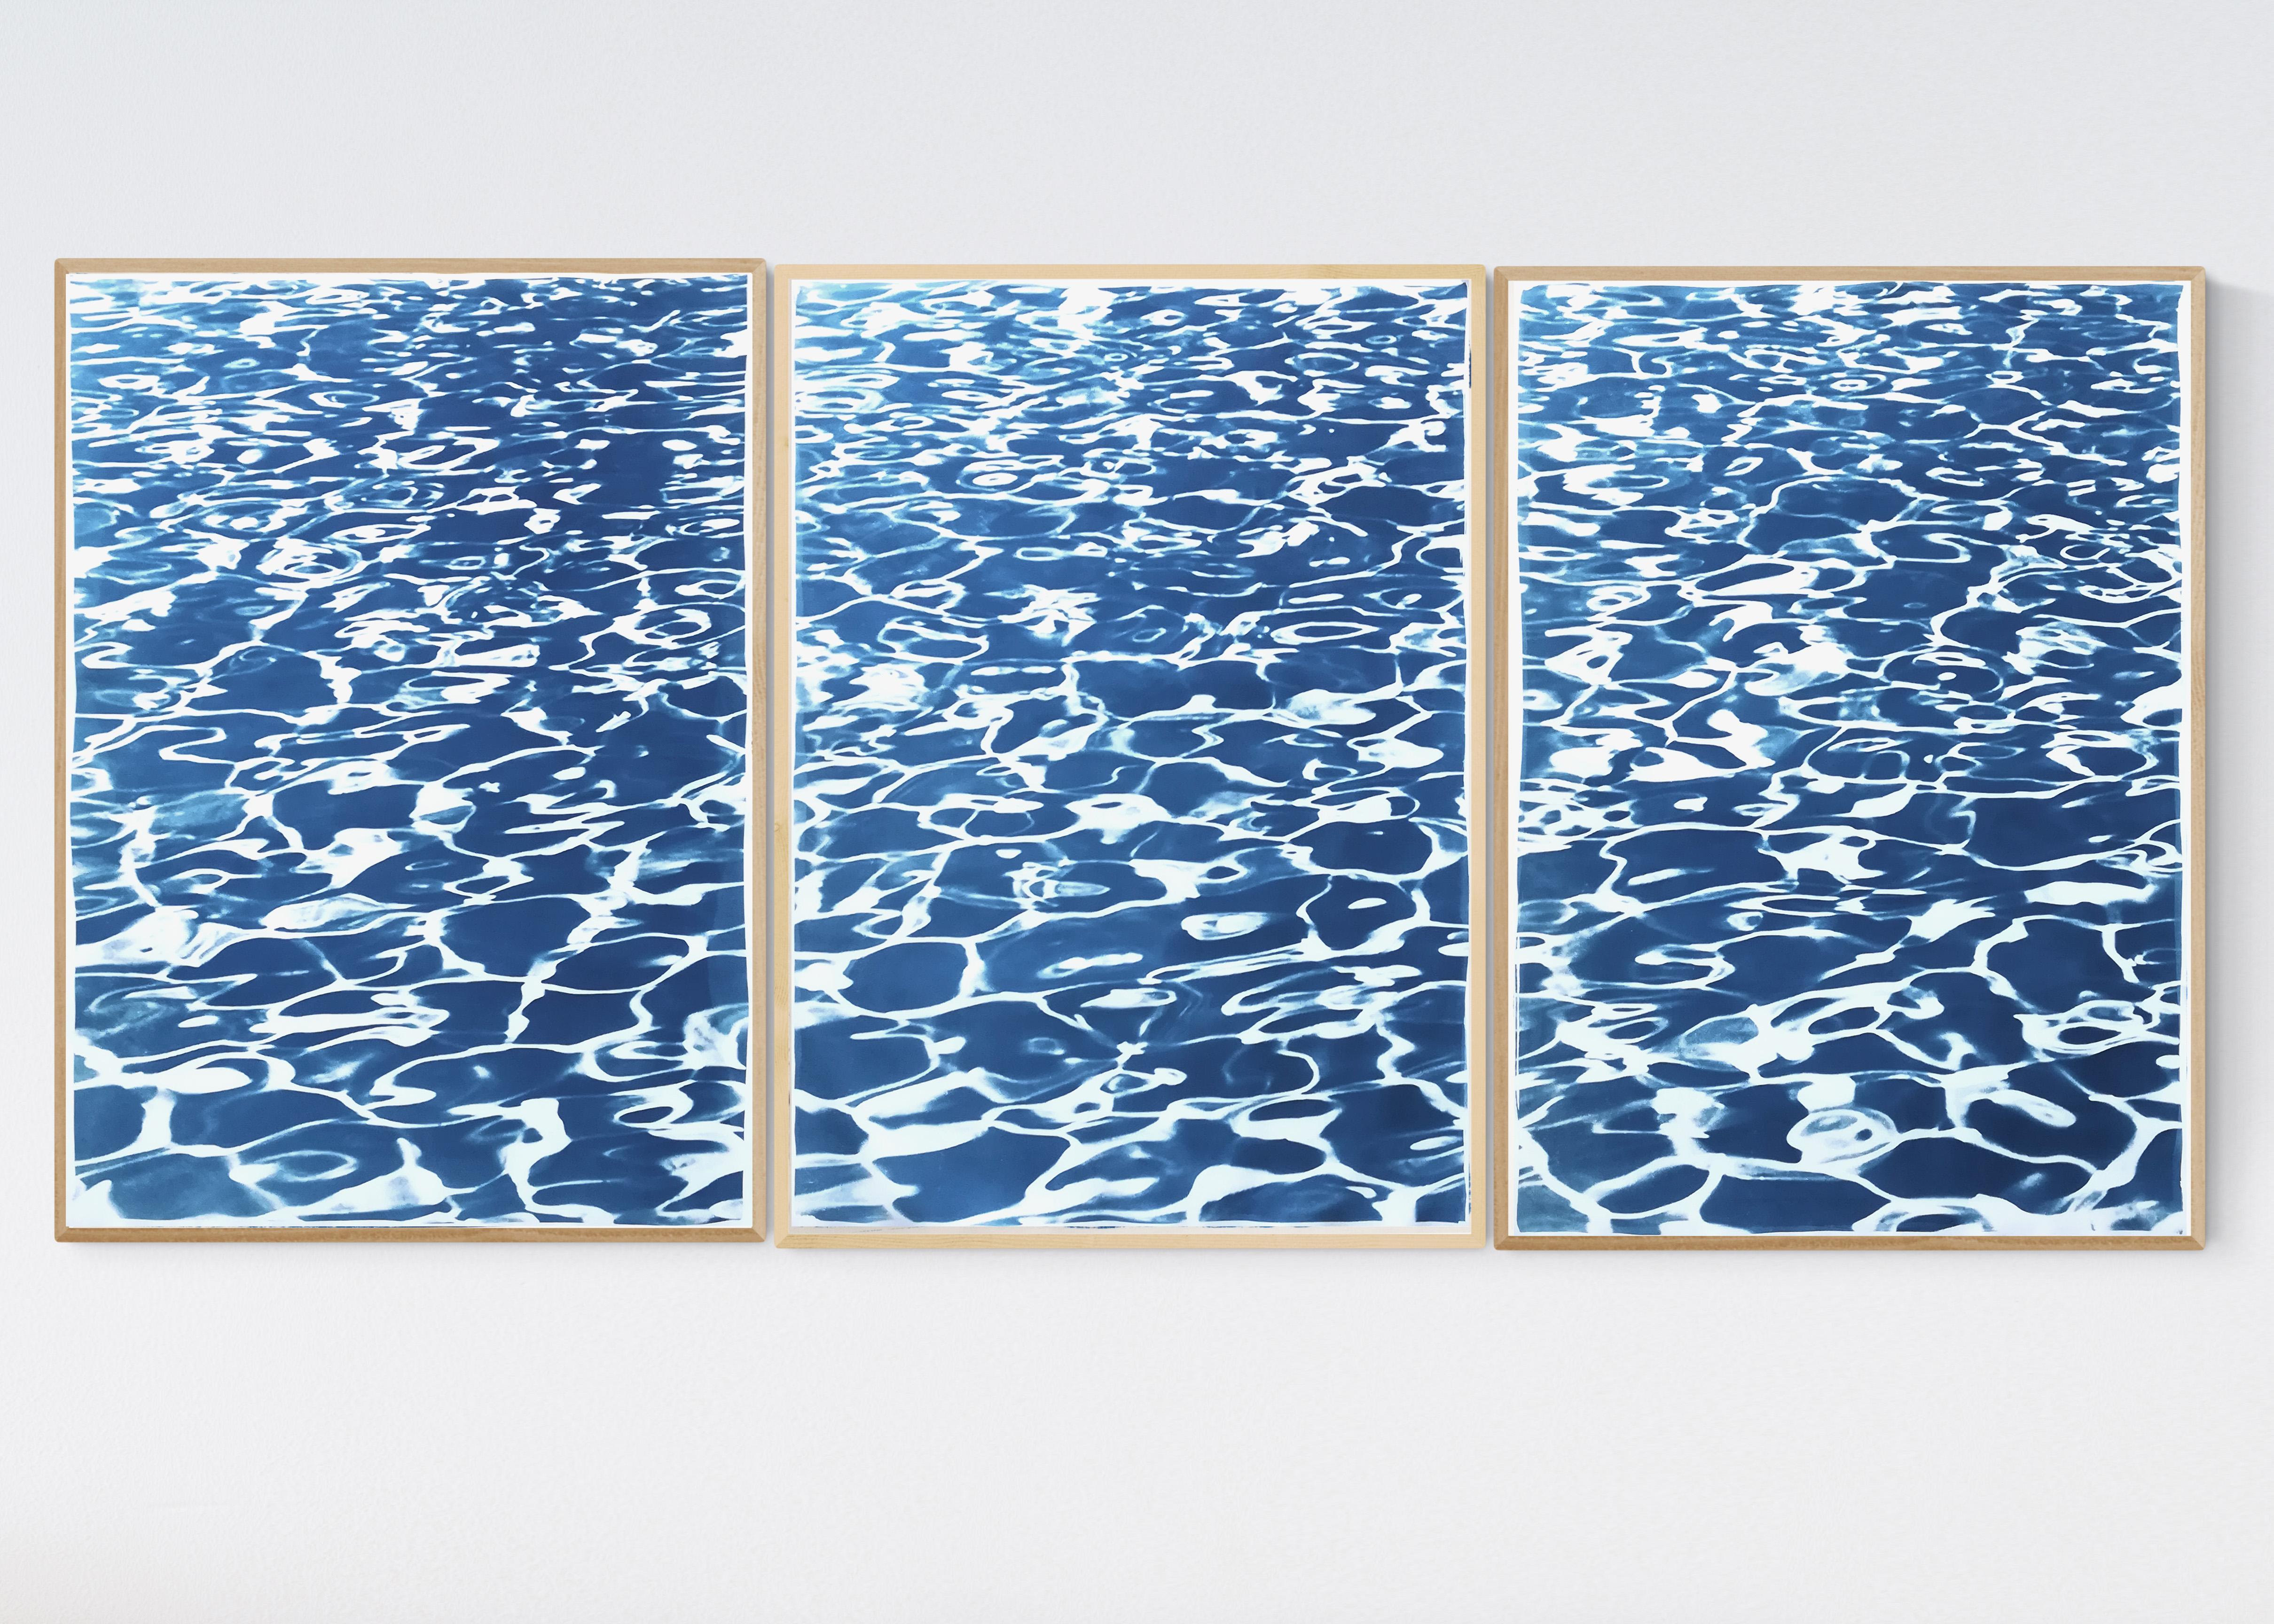 Pool Patterns, Nautical Abstract Seascape Triptych, Blue Cyanotype Print For Sale 2